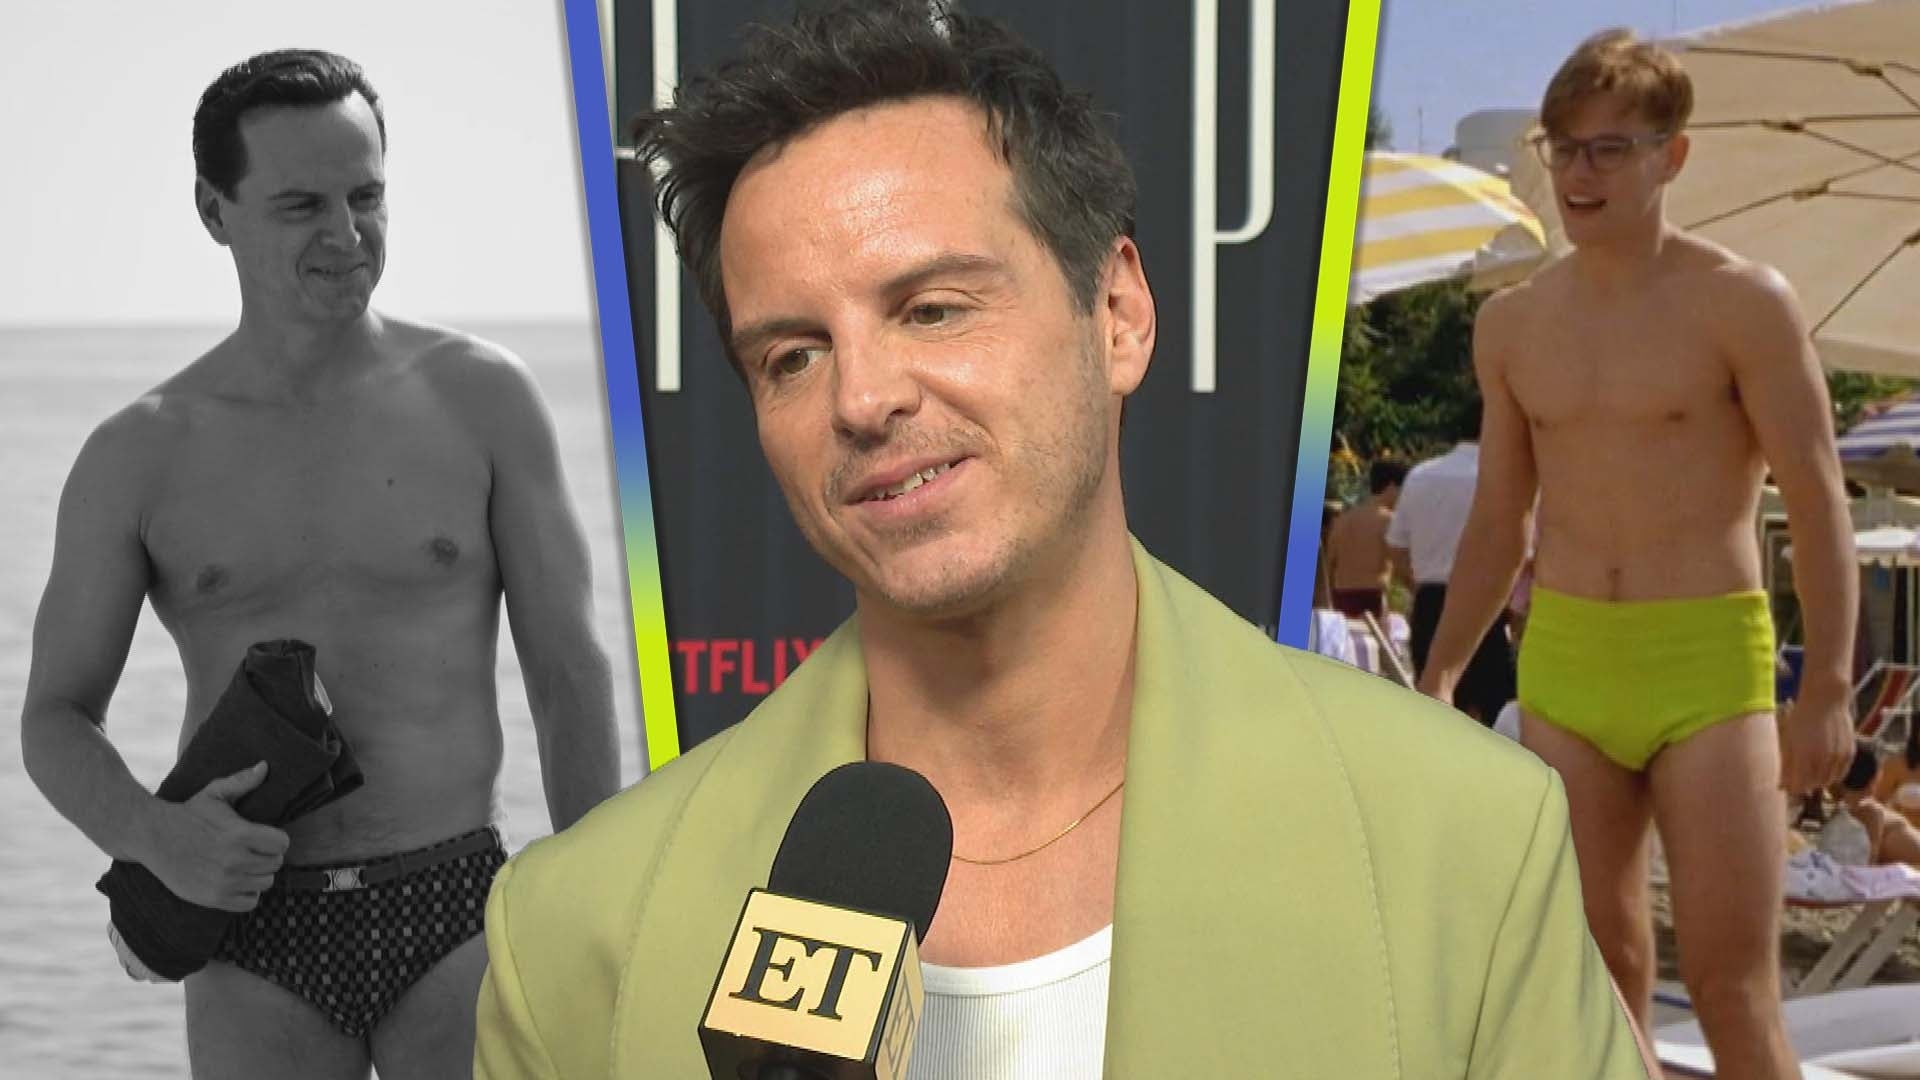 Andrew Scott Reacts to Being Compared to Matt Damon in ‘Ripley’ Beach Scene (Exclusive)